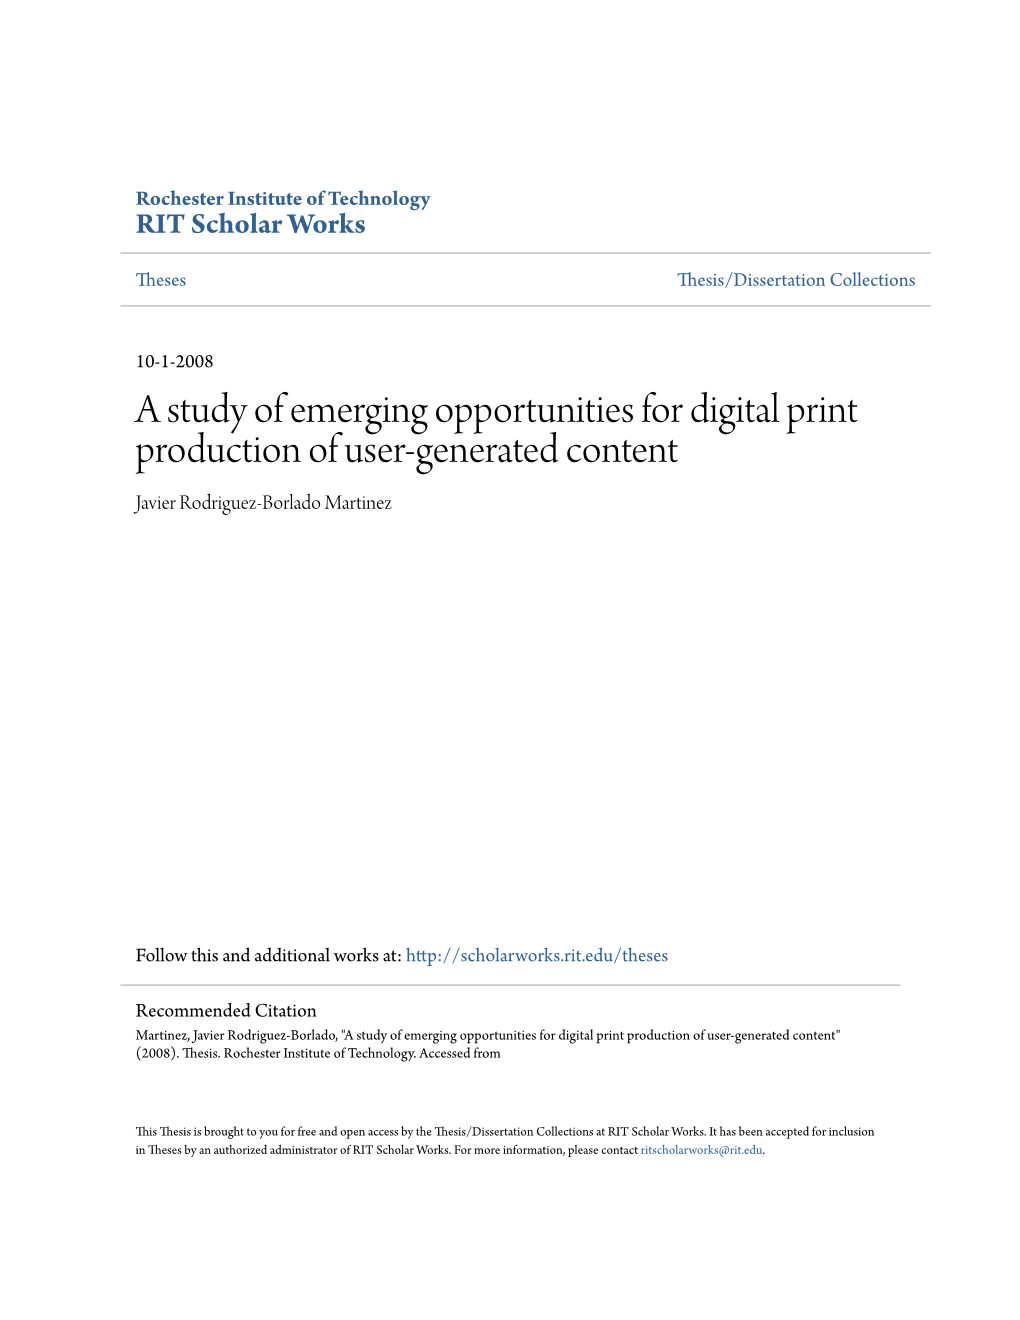 A Study of Emerging Opportunities for Digital Print Production of User-Generated Content Javier Rodriguez-Borlado Martinez